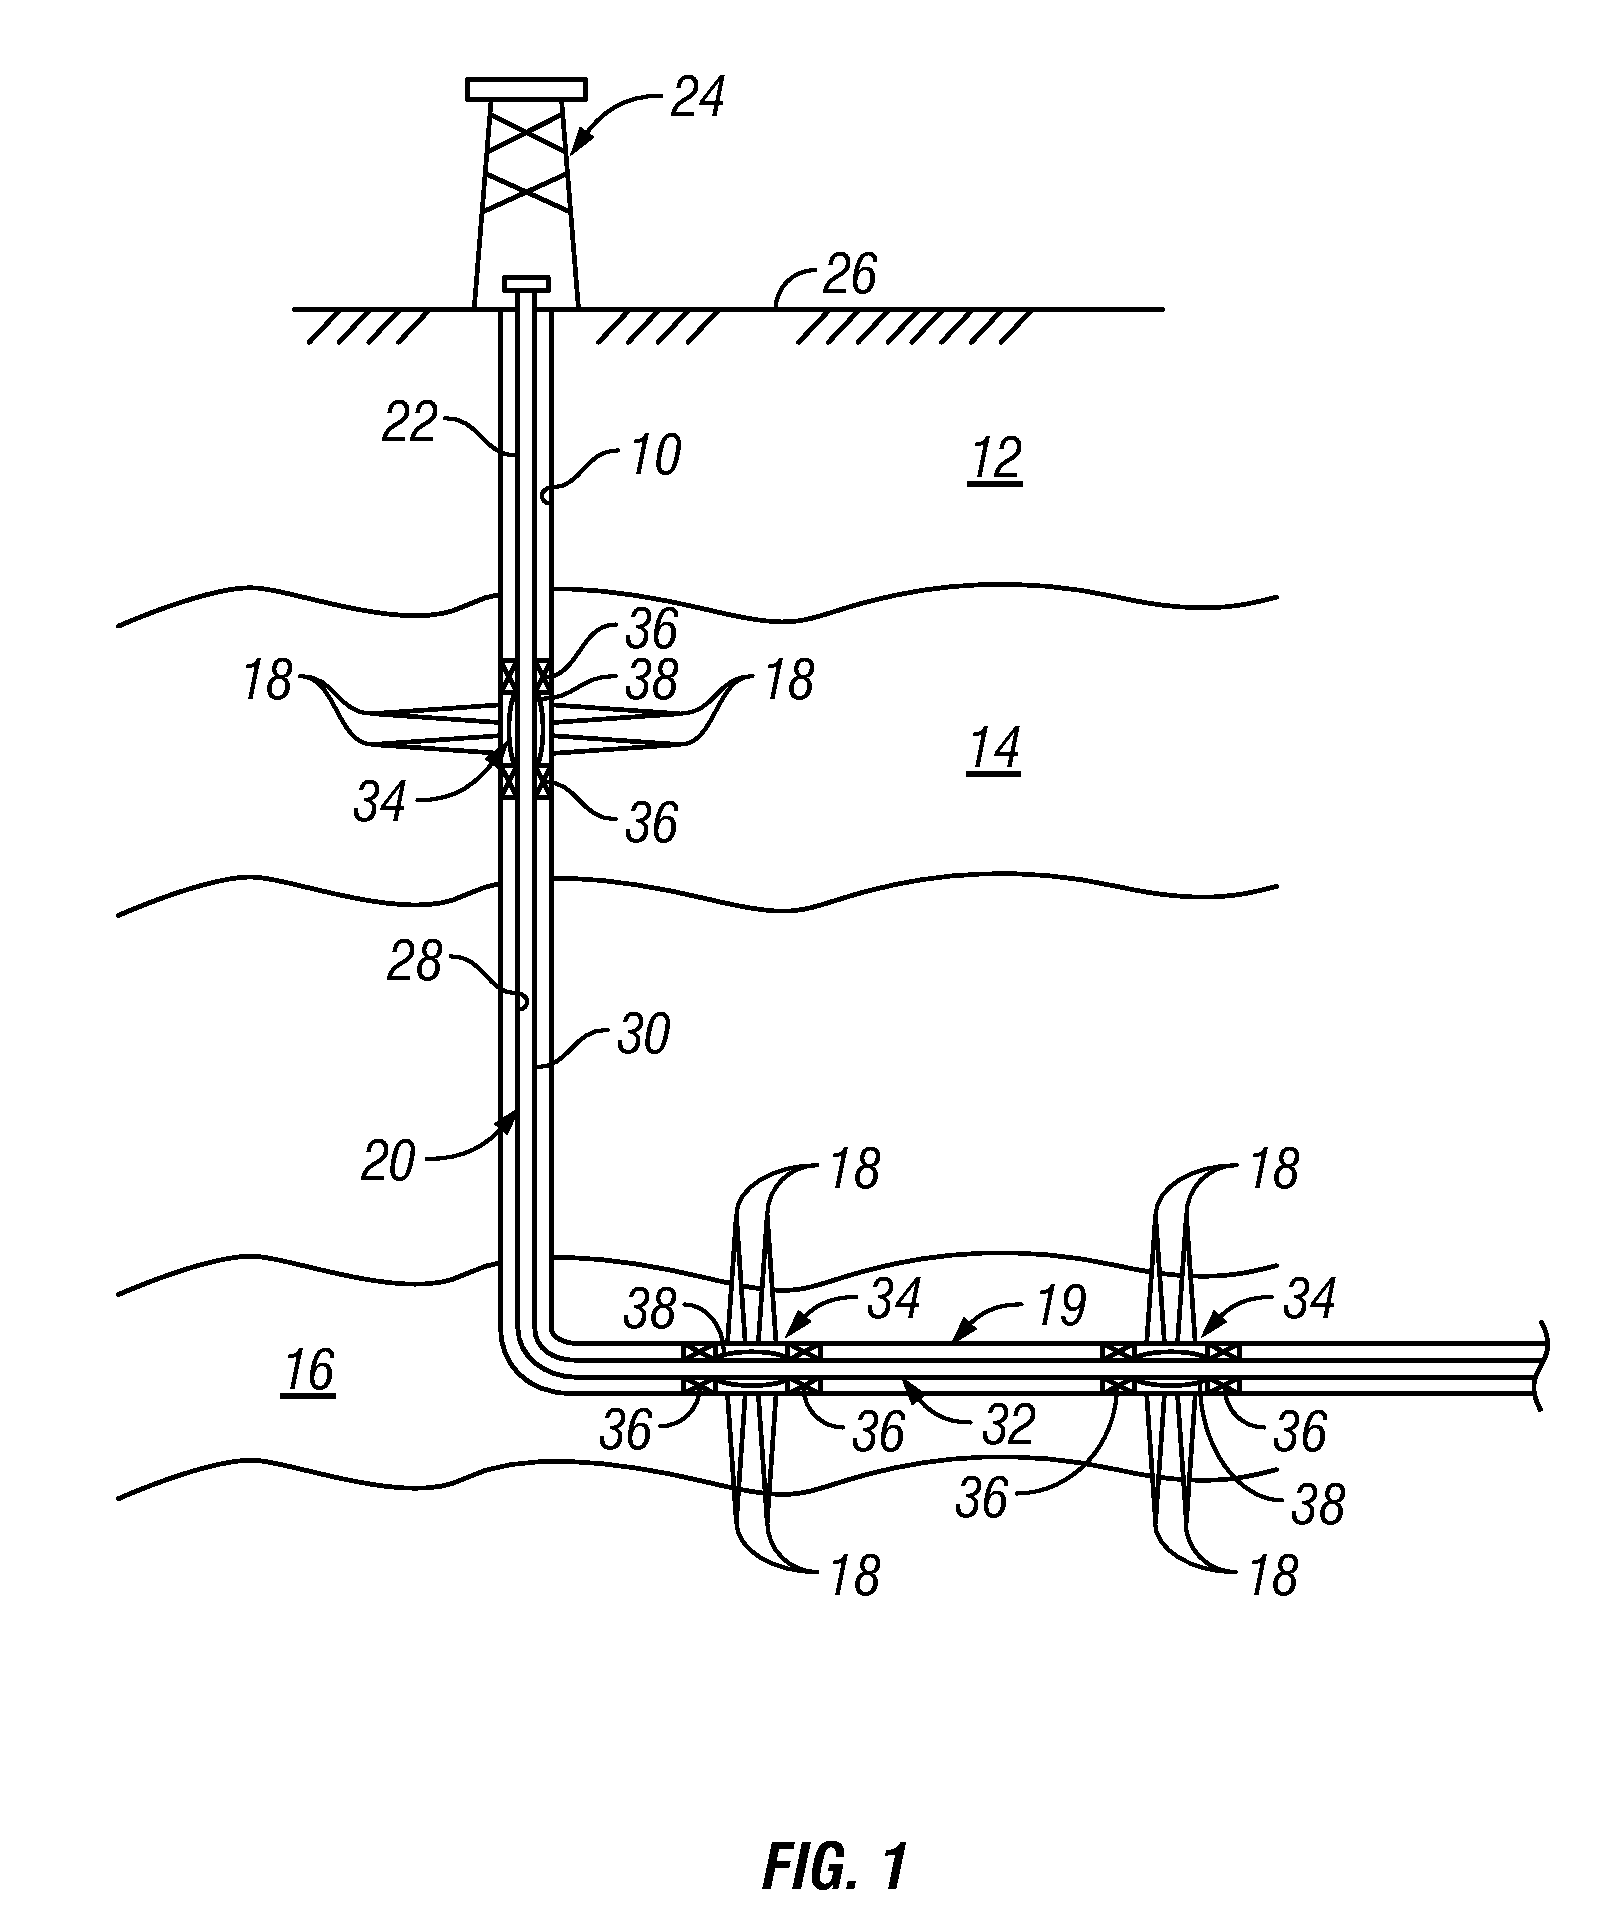 Water Absorbing Materials Used as an In-flow Control Device